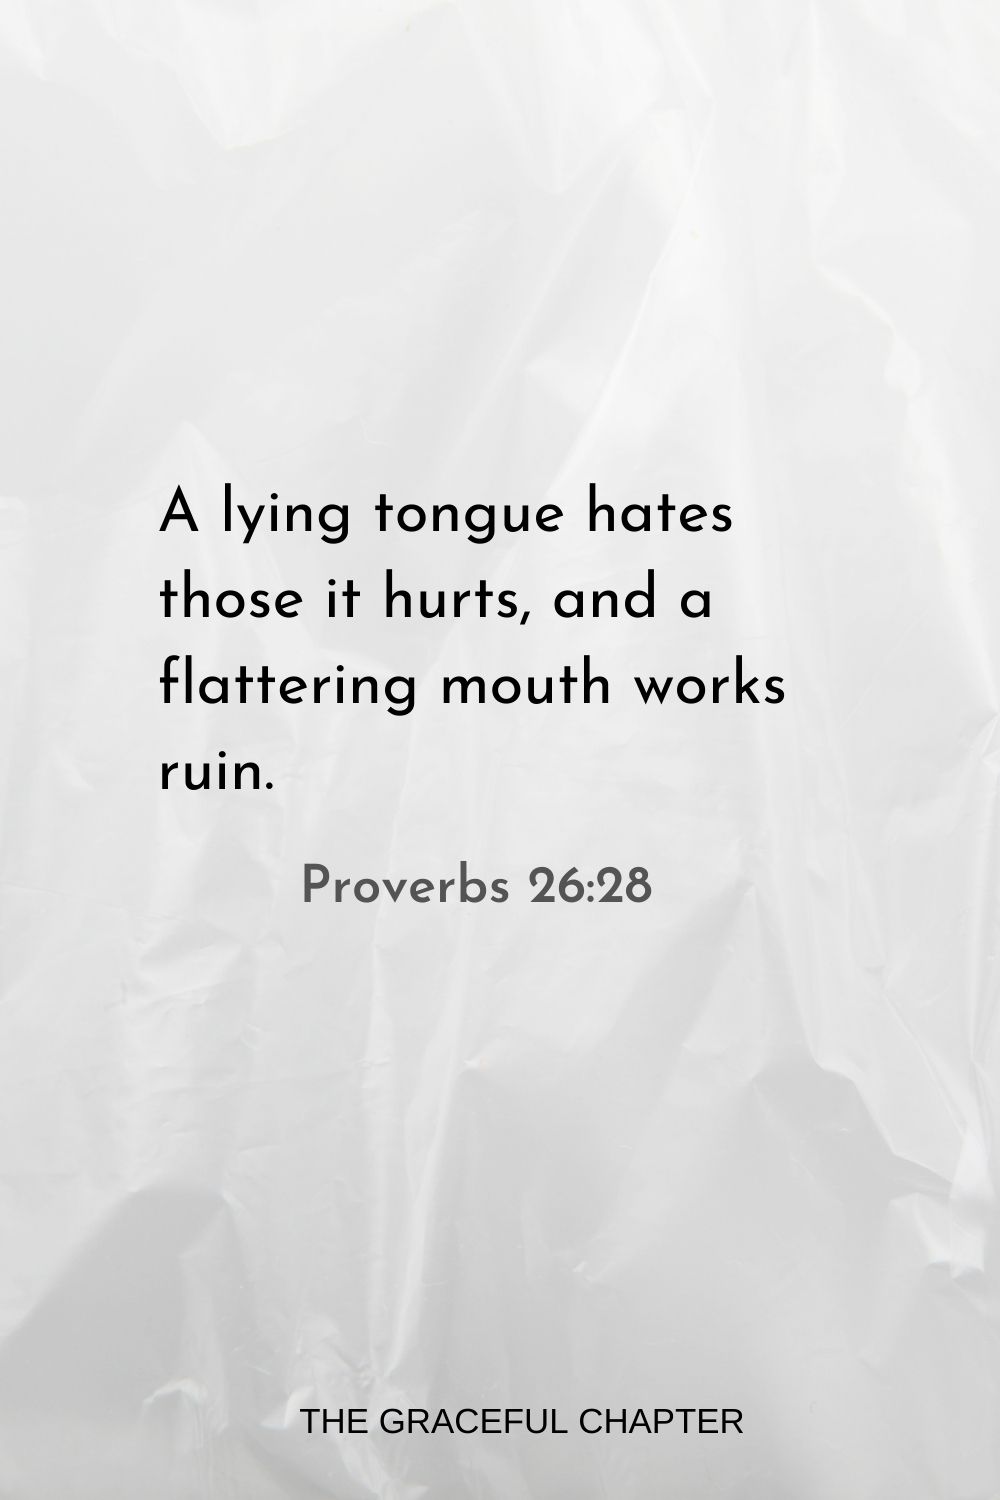 A lying tongue hates those it hurts, and a flattering mouth works ruin. Proverbs 26:28